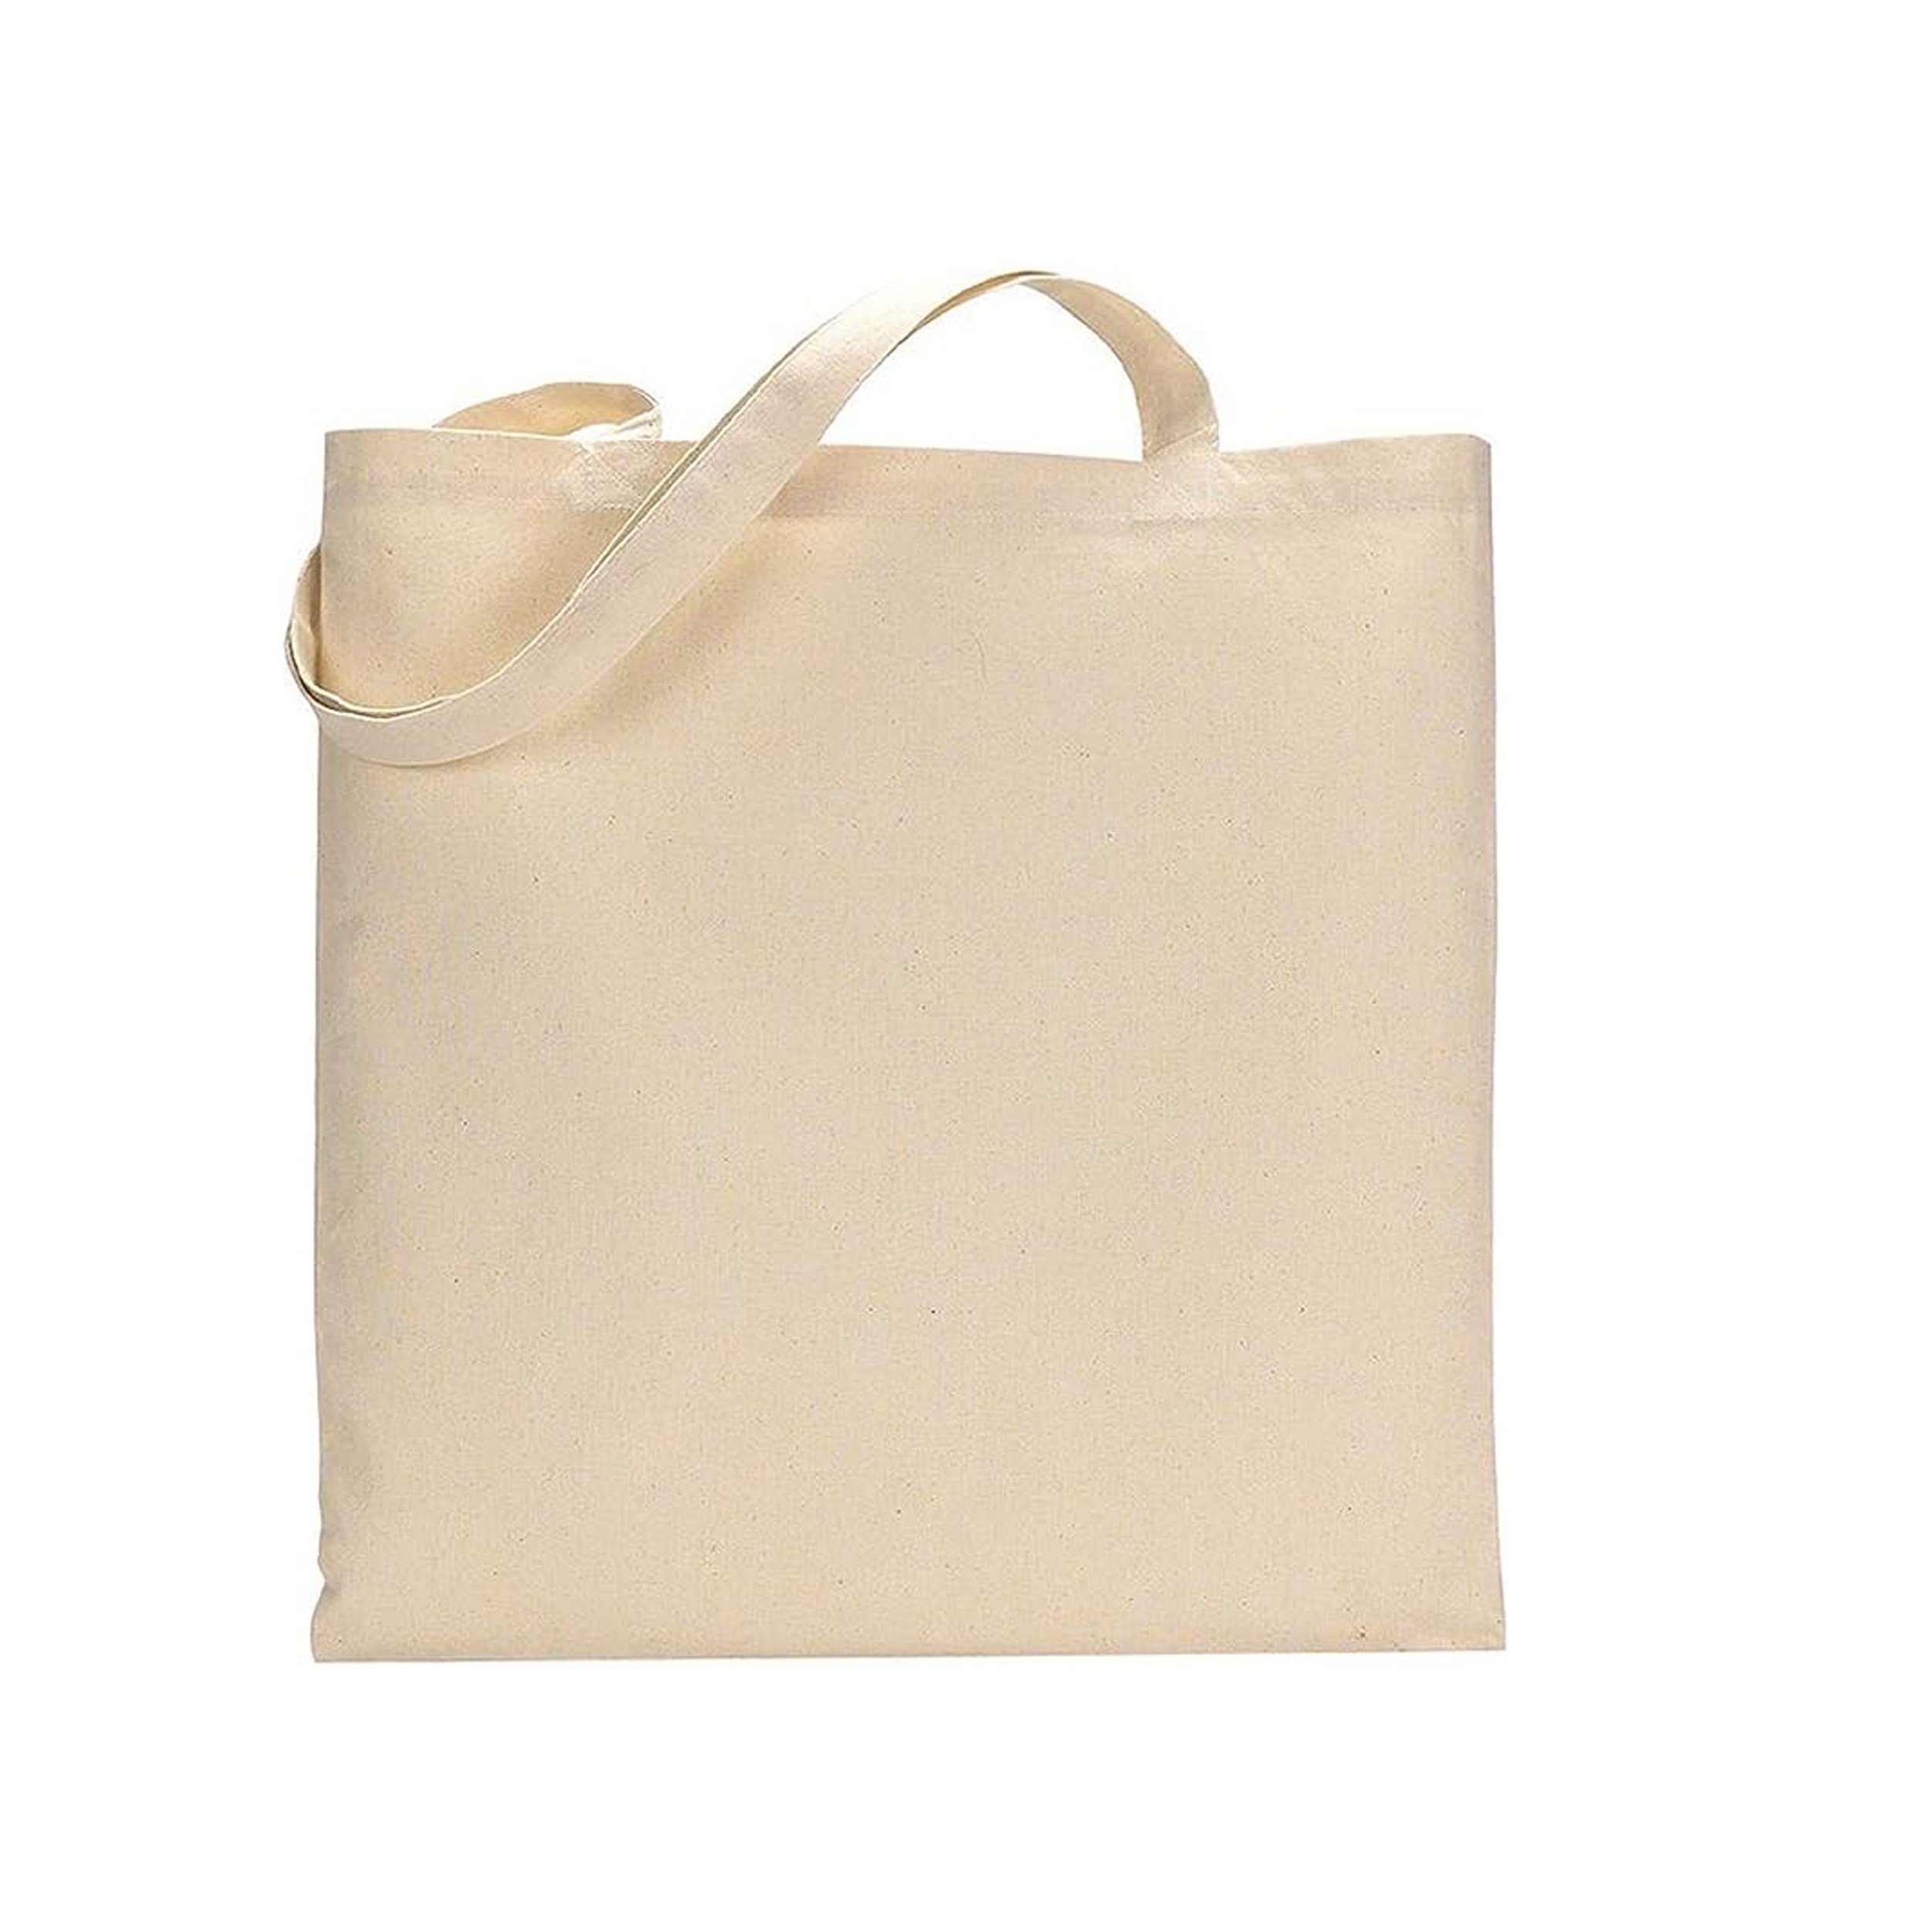 Blank Canvas Tote Bags 12 Pack Wholesale Book Small Reusable Eco